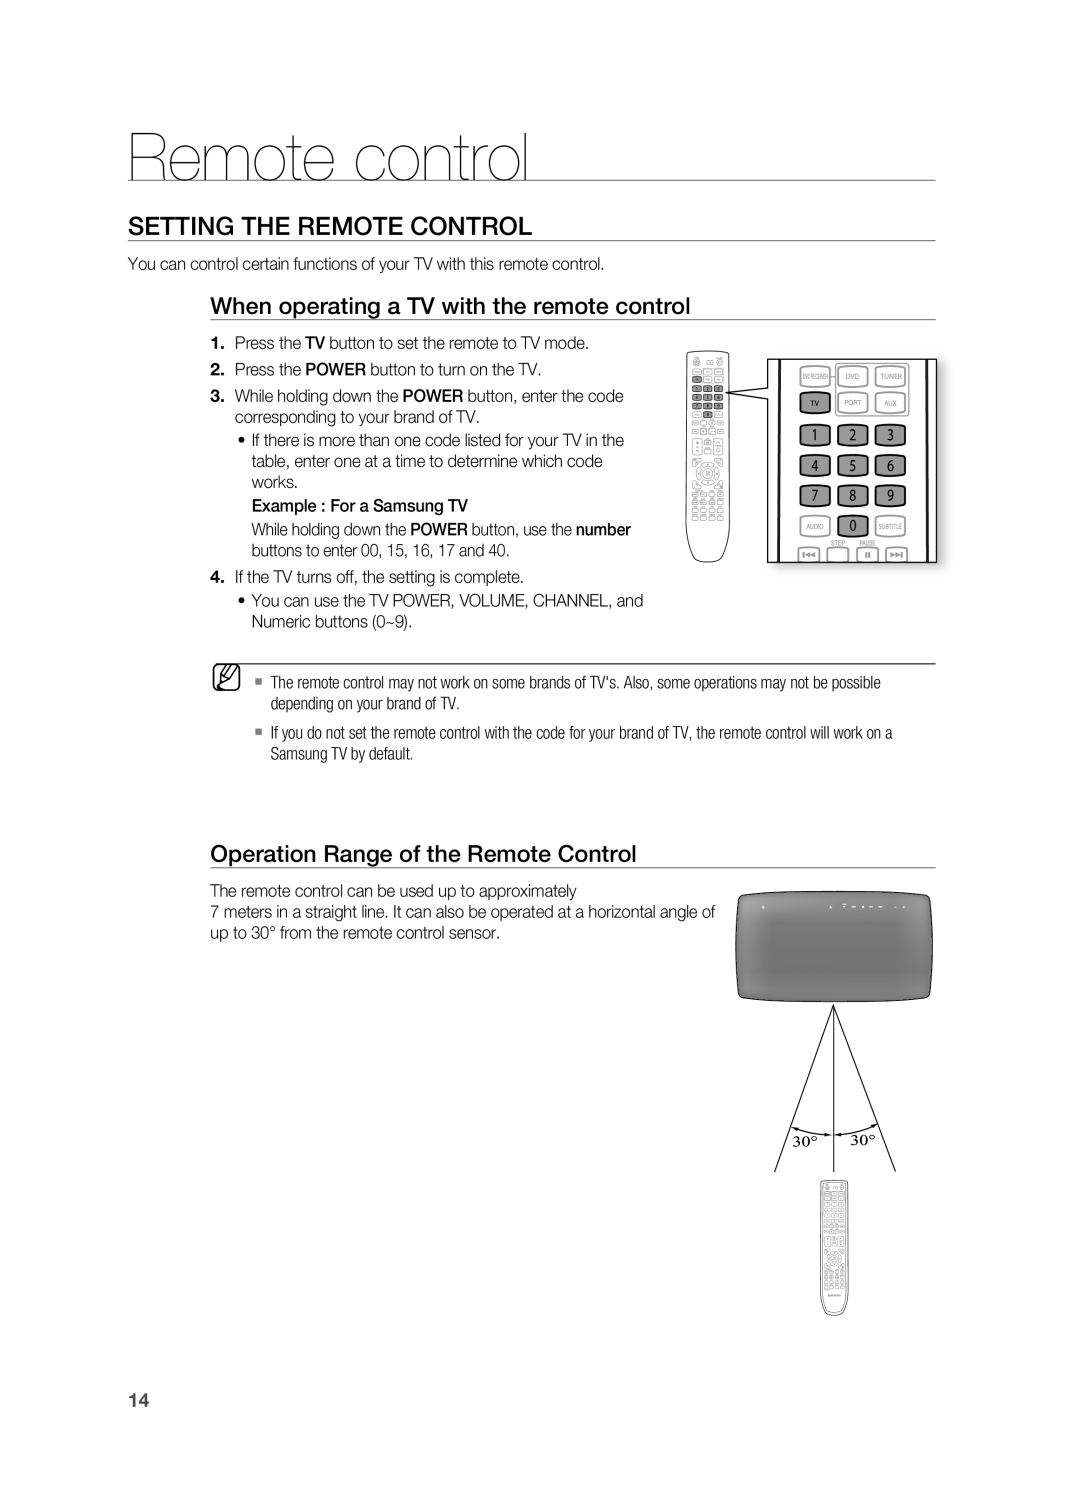 Samsung HT-TX725G, HT-X725 SETTING THE rEMOTE CONTrOL, Remote control, When operating a TV with the remote control 